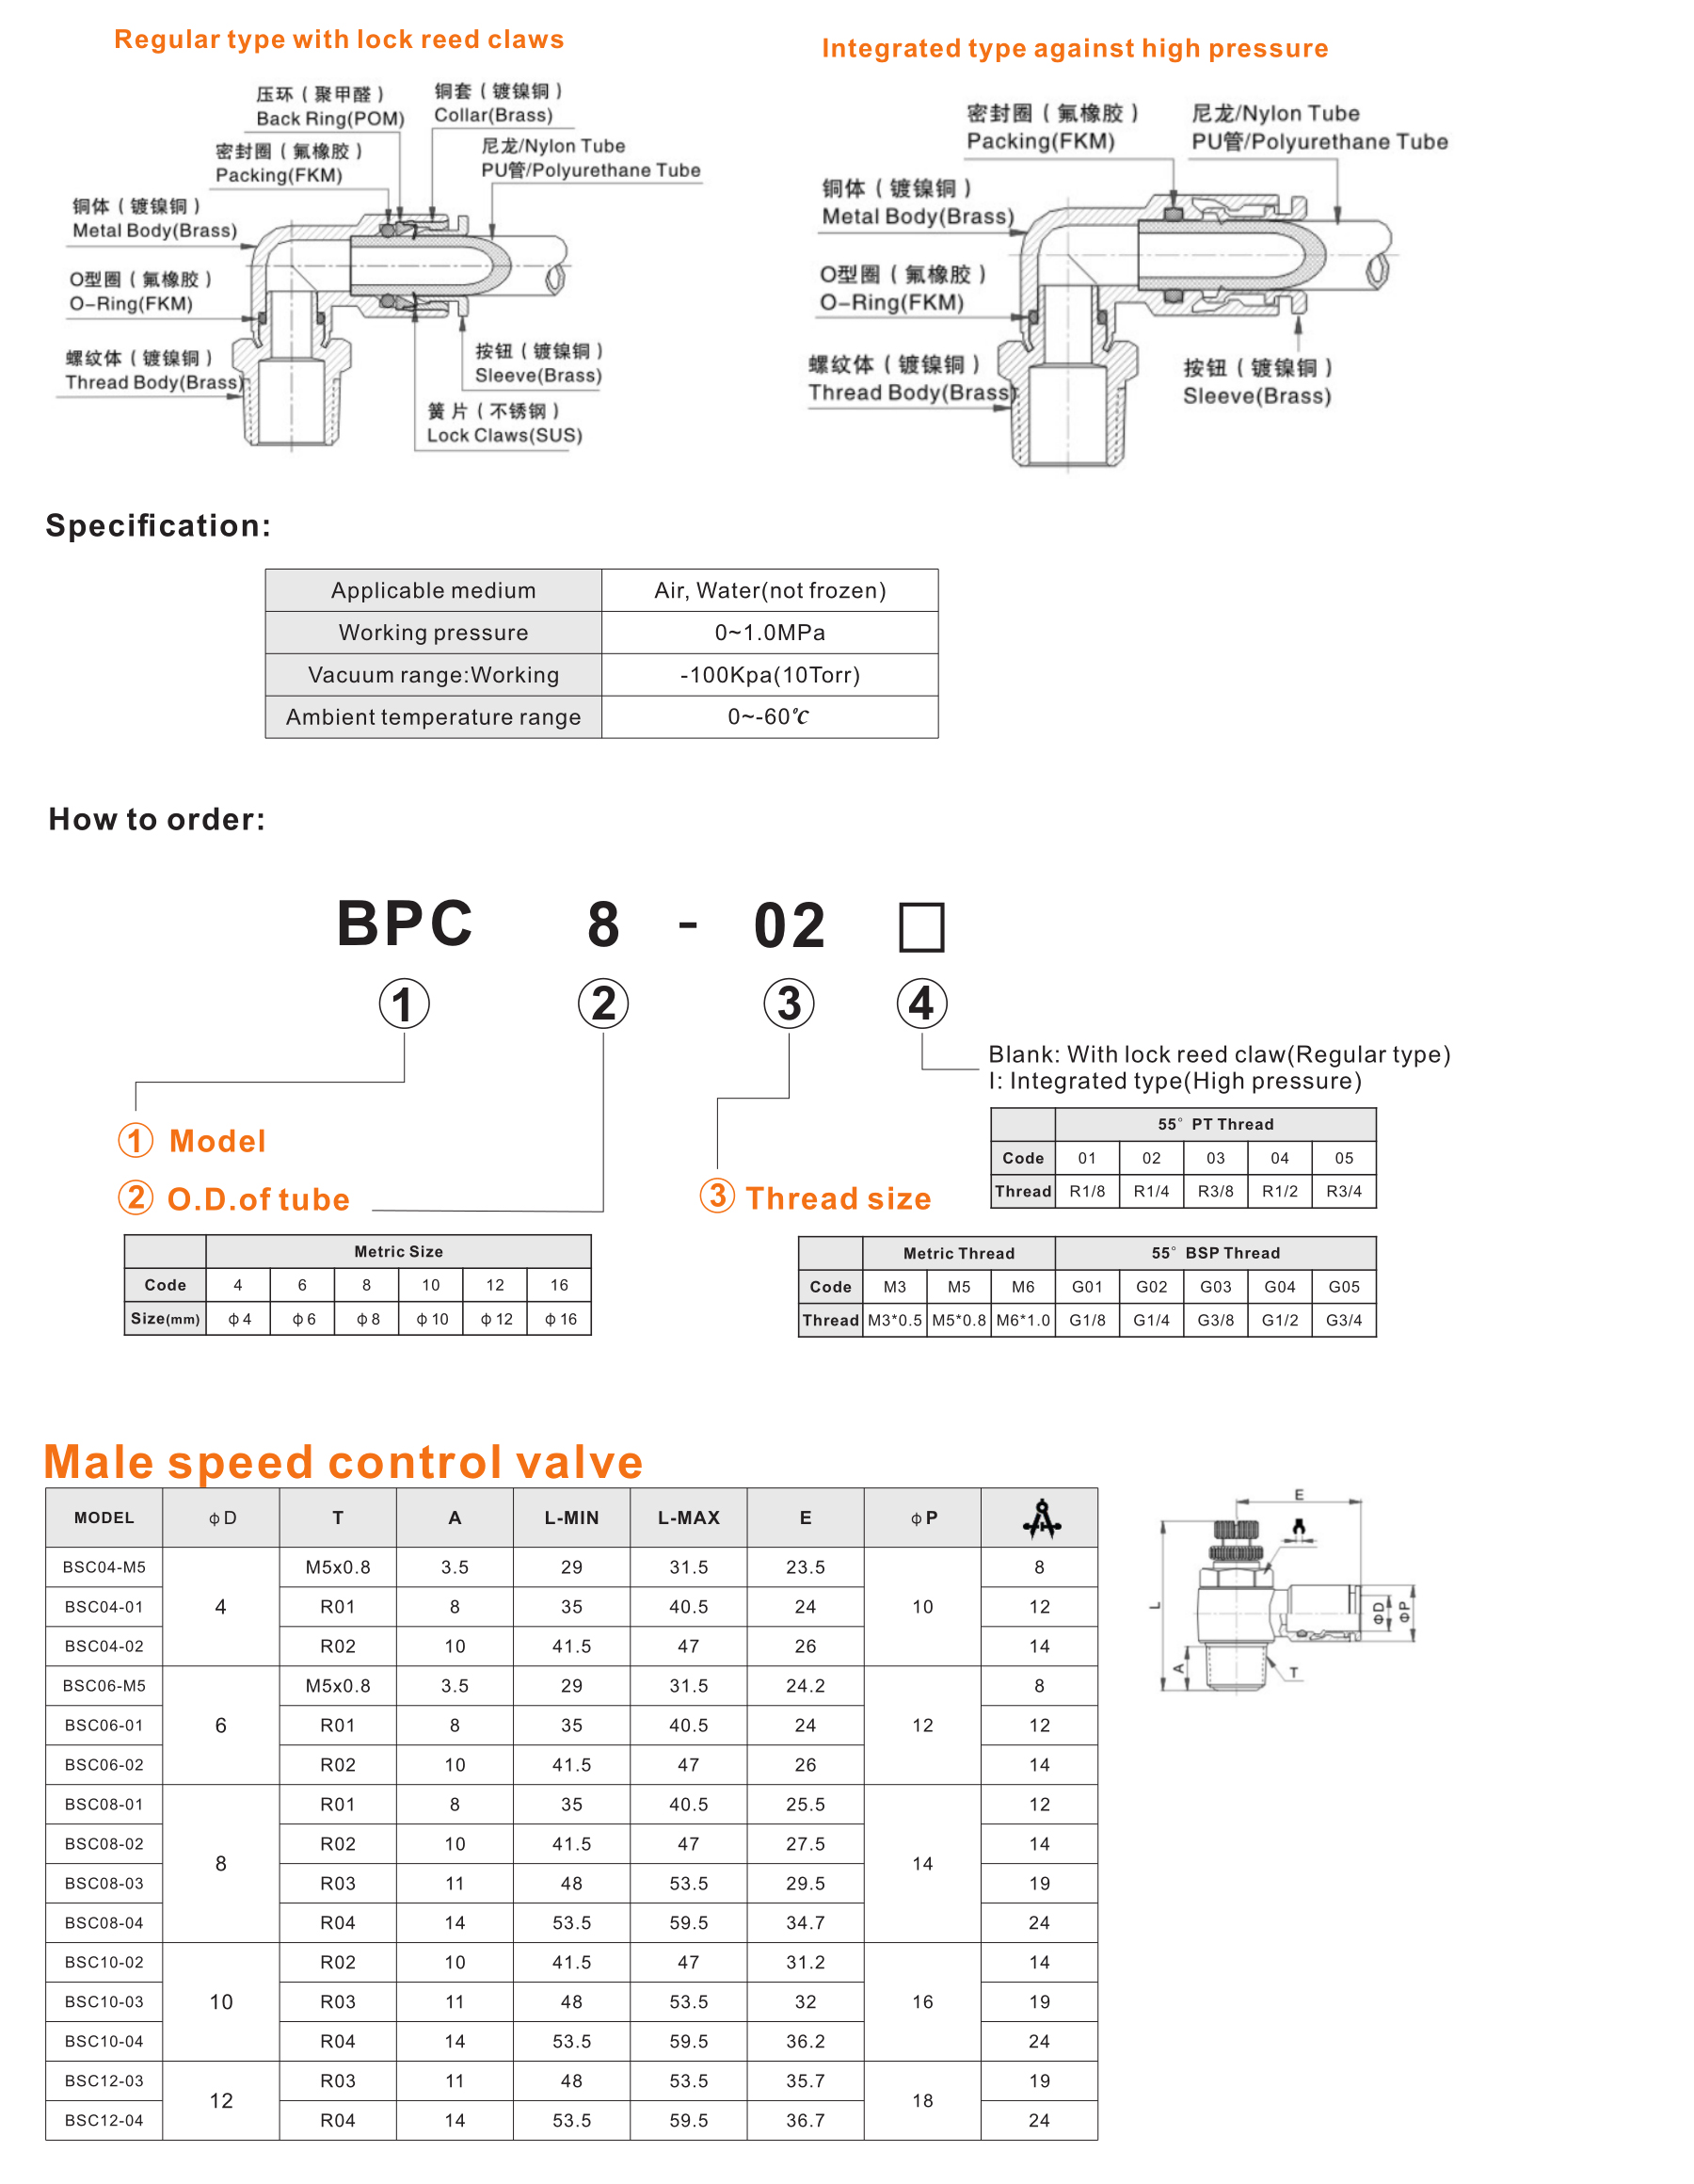 BSC Male speed control valve